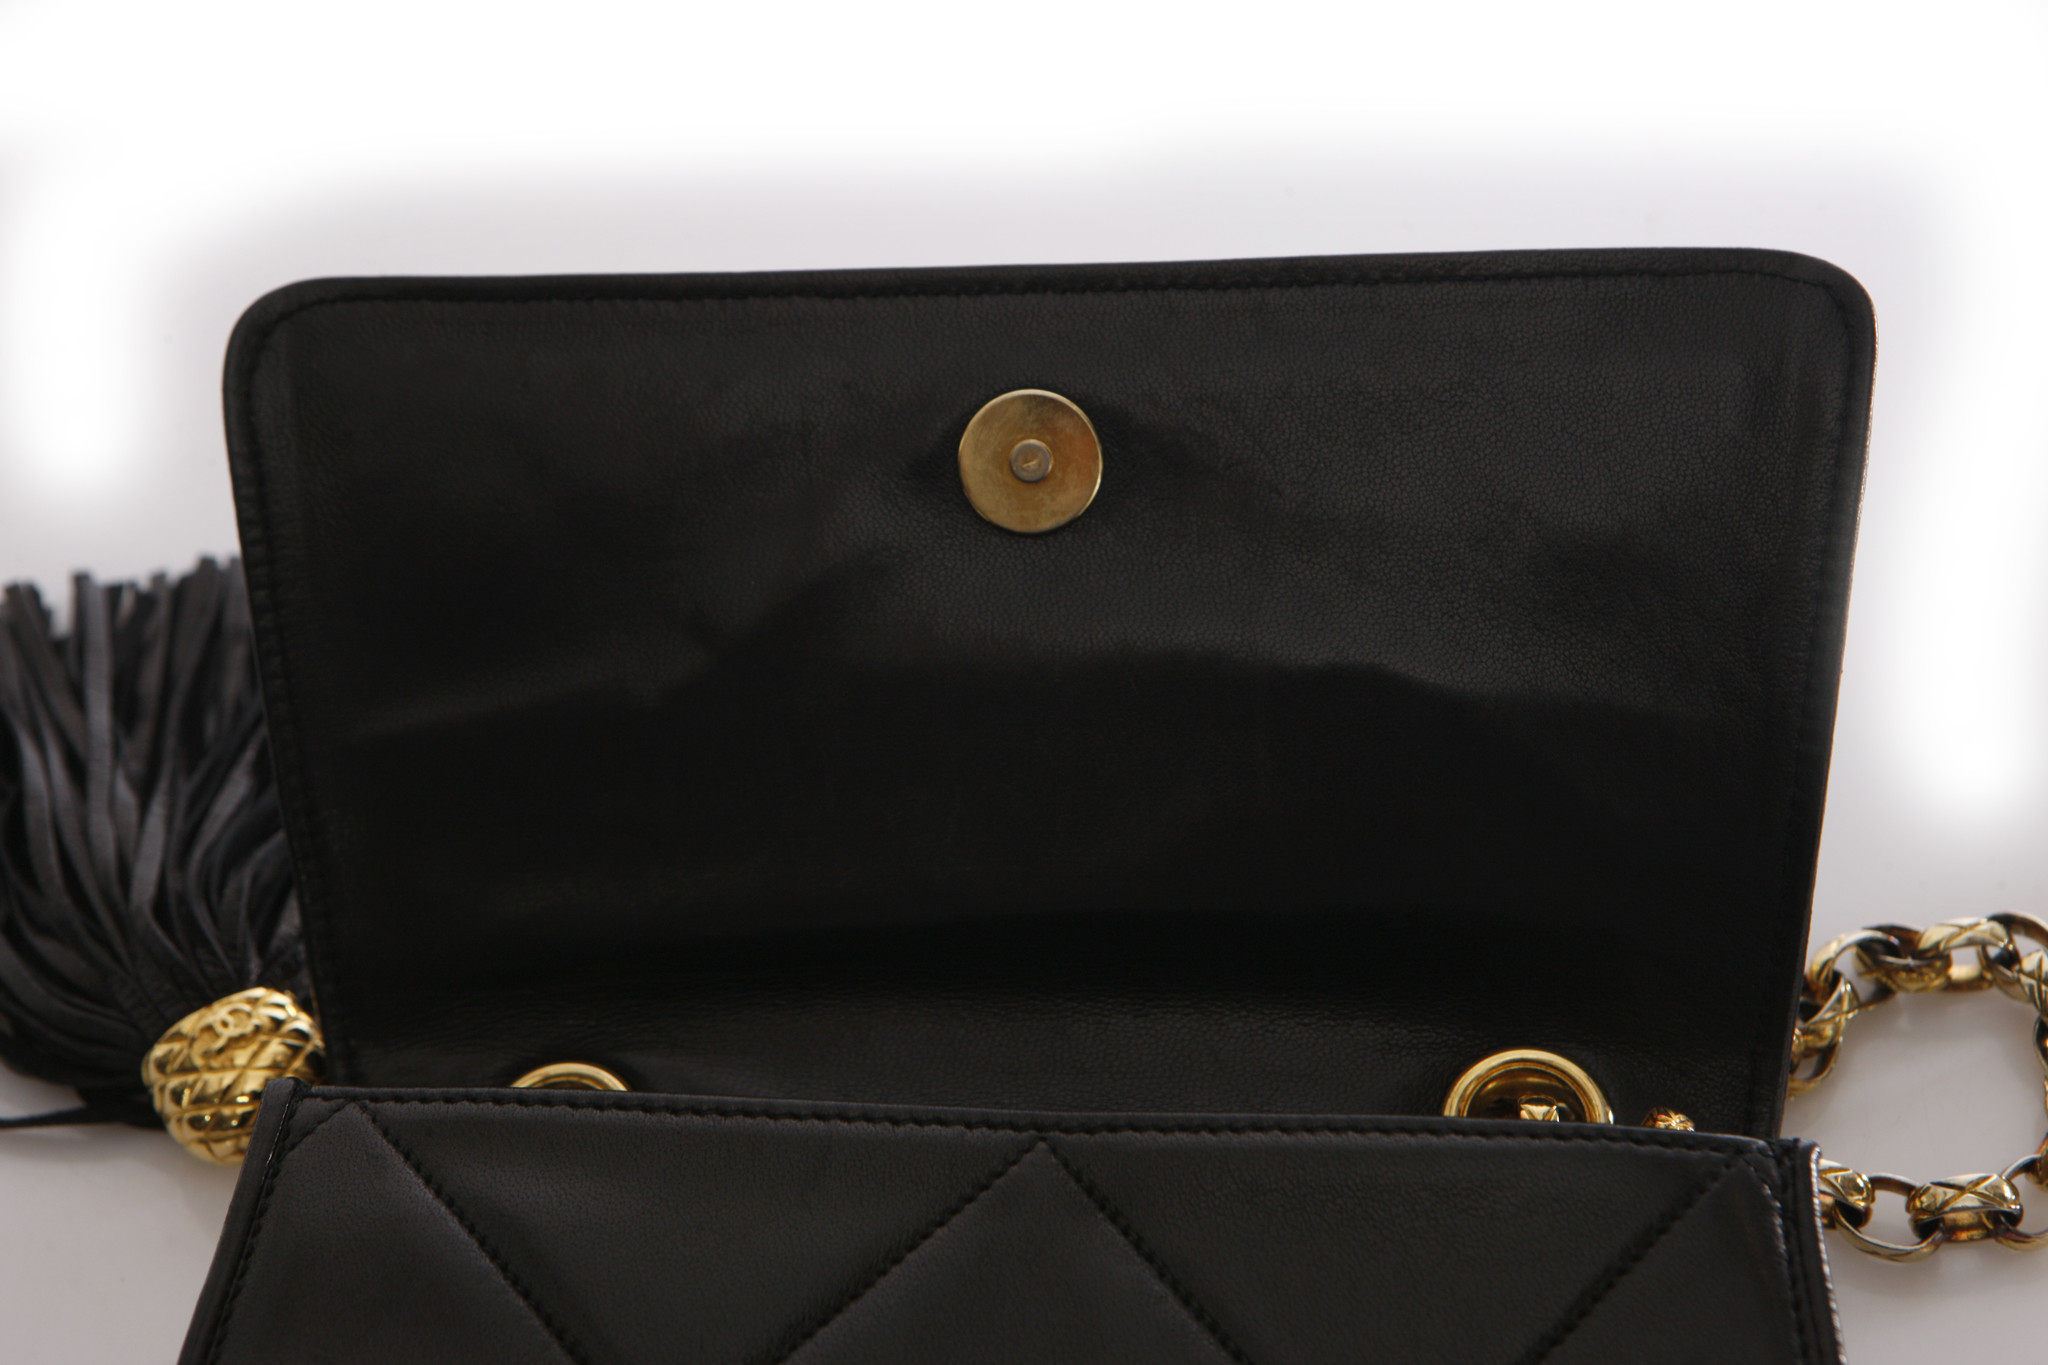 Nass boutique is a multibrand boutique curating womens clothing and  accessoriesVINTAGE CHANEL BLACK QUILTED FLAP BAG